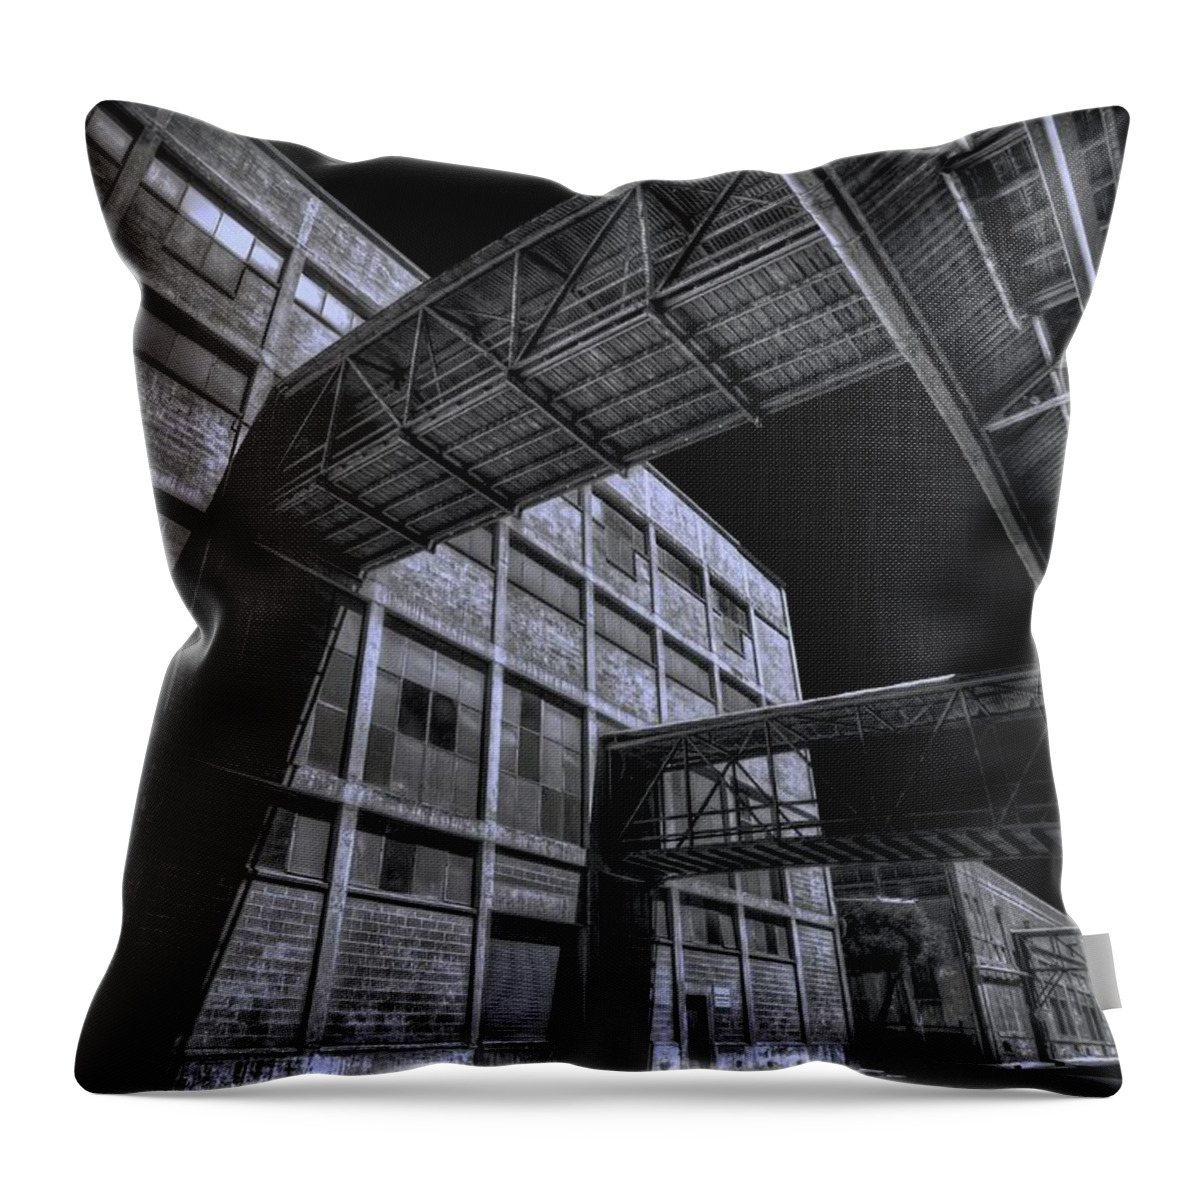 Architecture Throw Pillow featuring the photograph Through A Glass Darkly by Wayne Sherriff